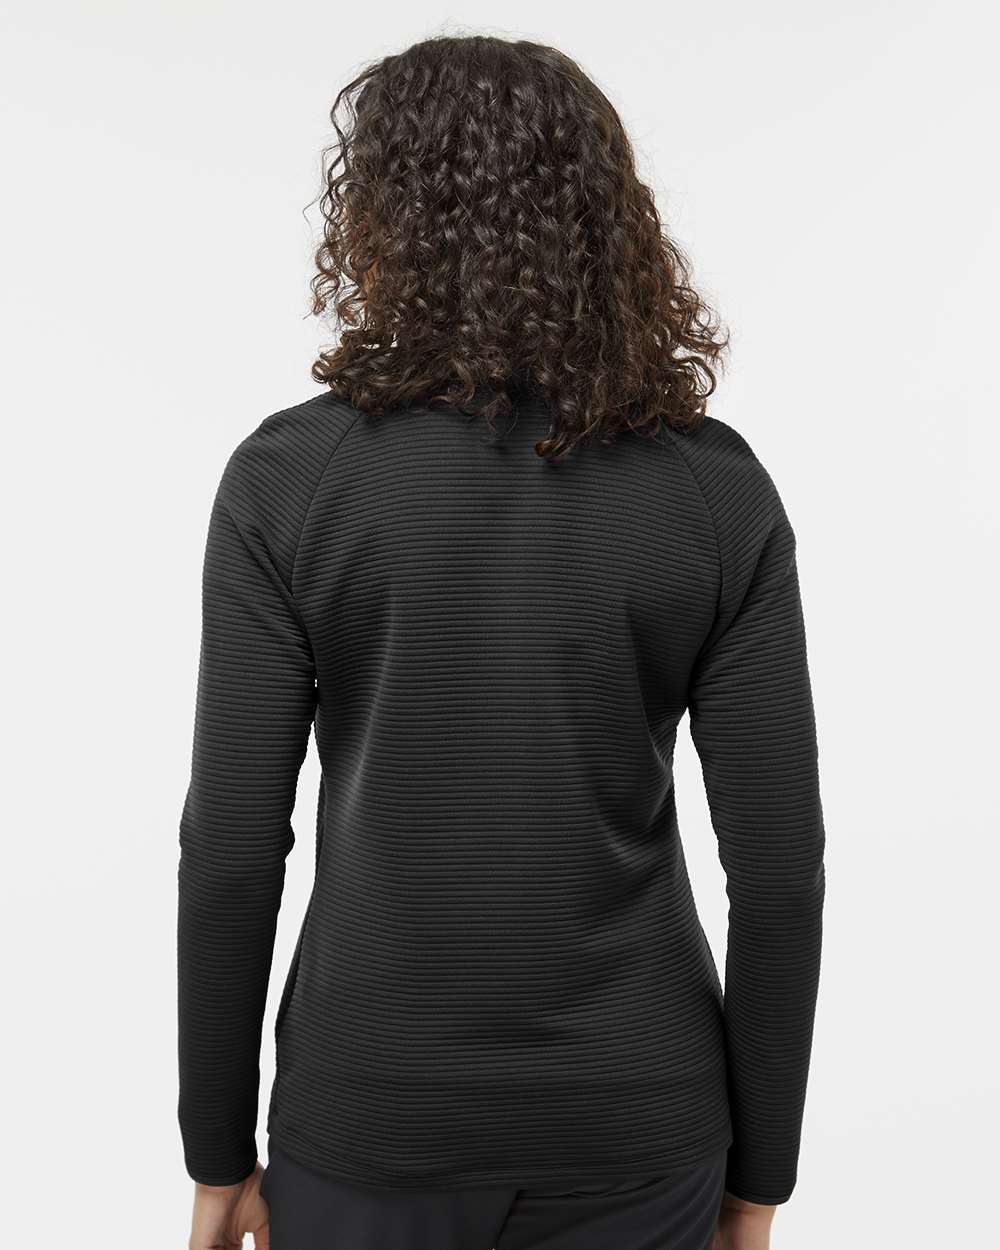 Adidas  A589 Women's Spacer Quarter-Zip Pullover #colormdl_Black